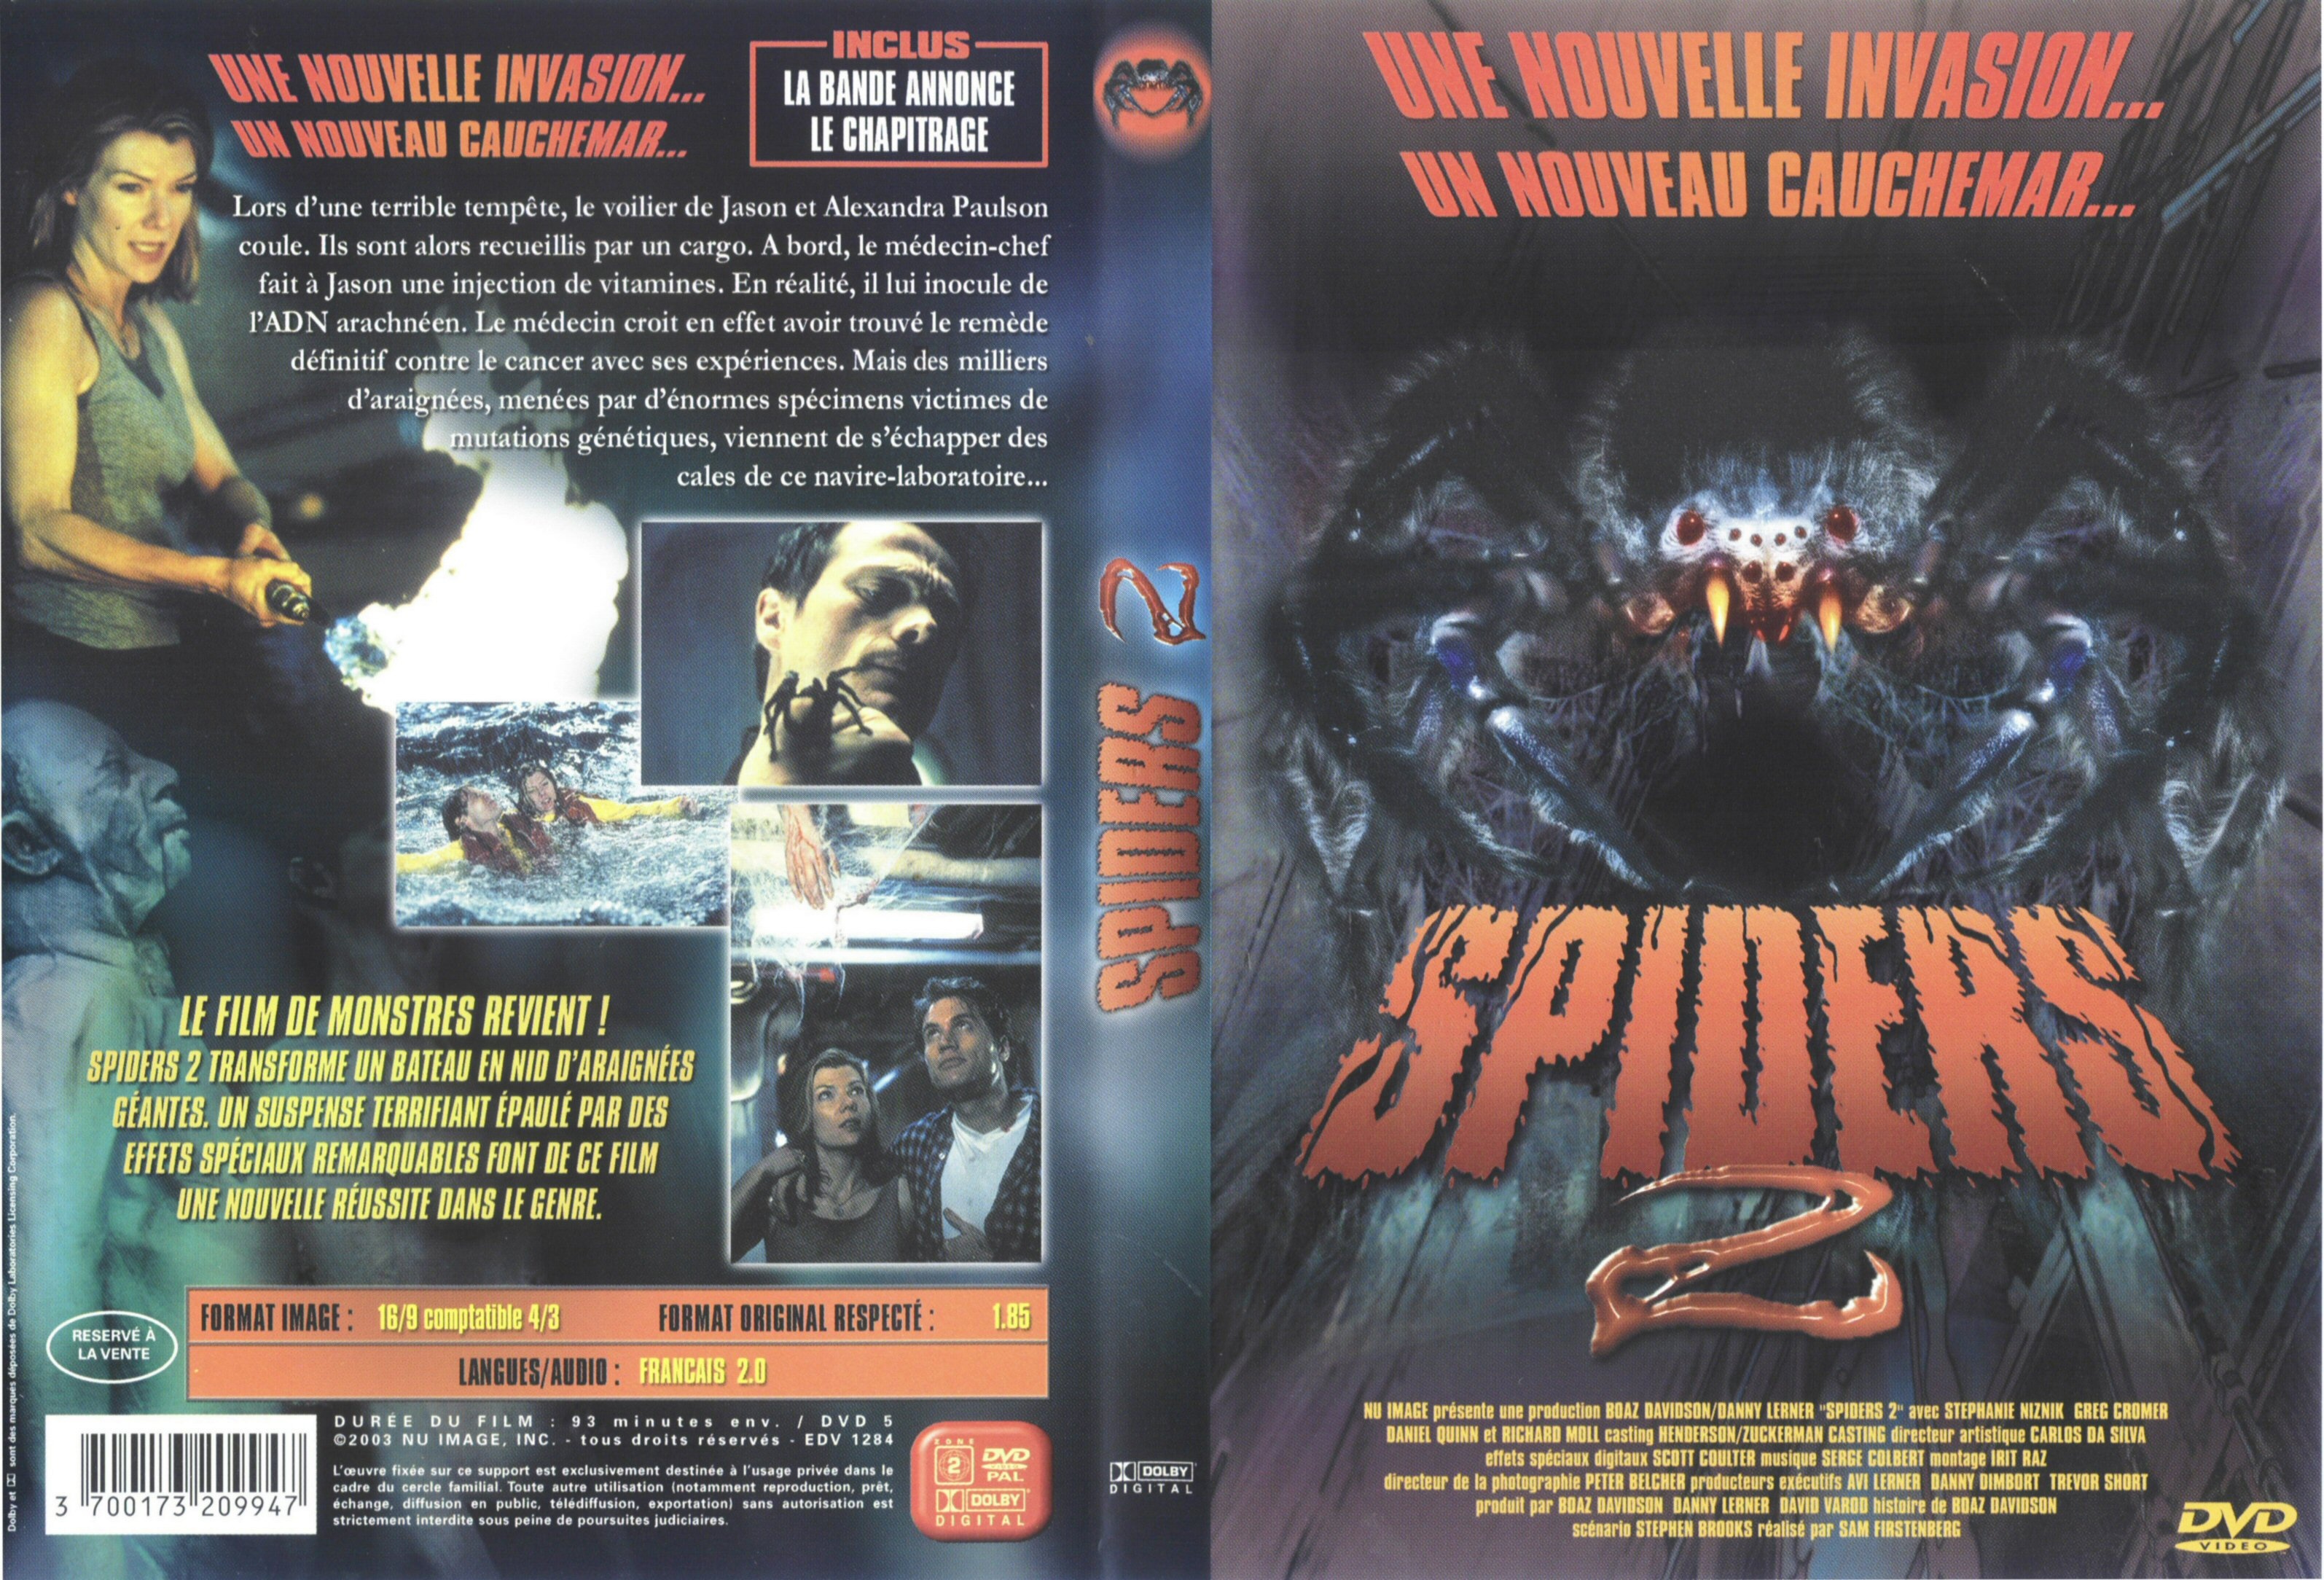 Jaquette DVD Spiders 2